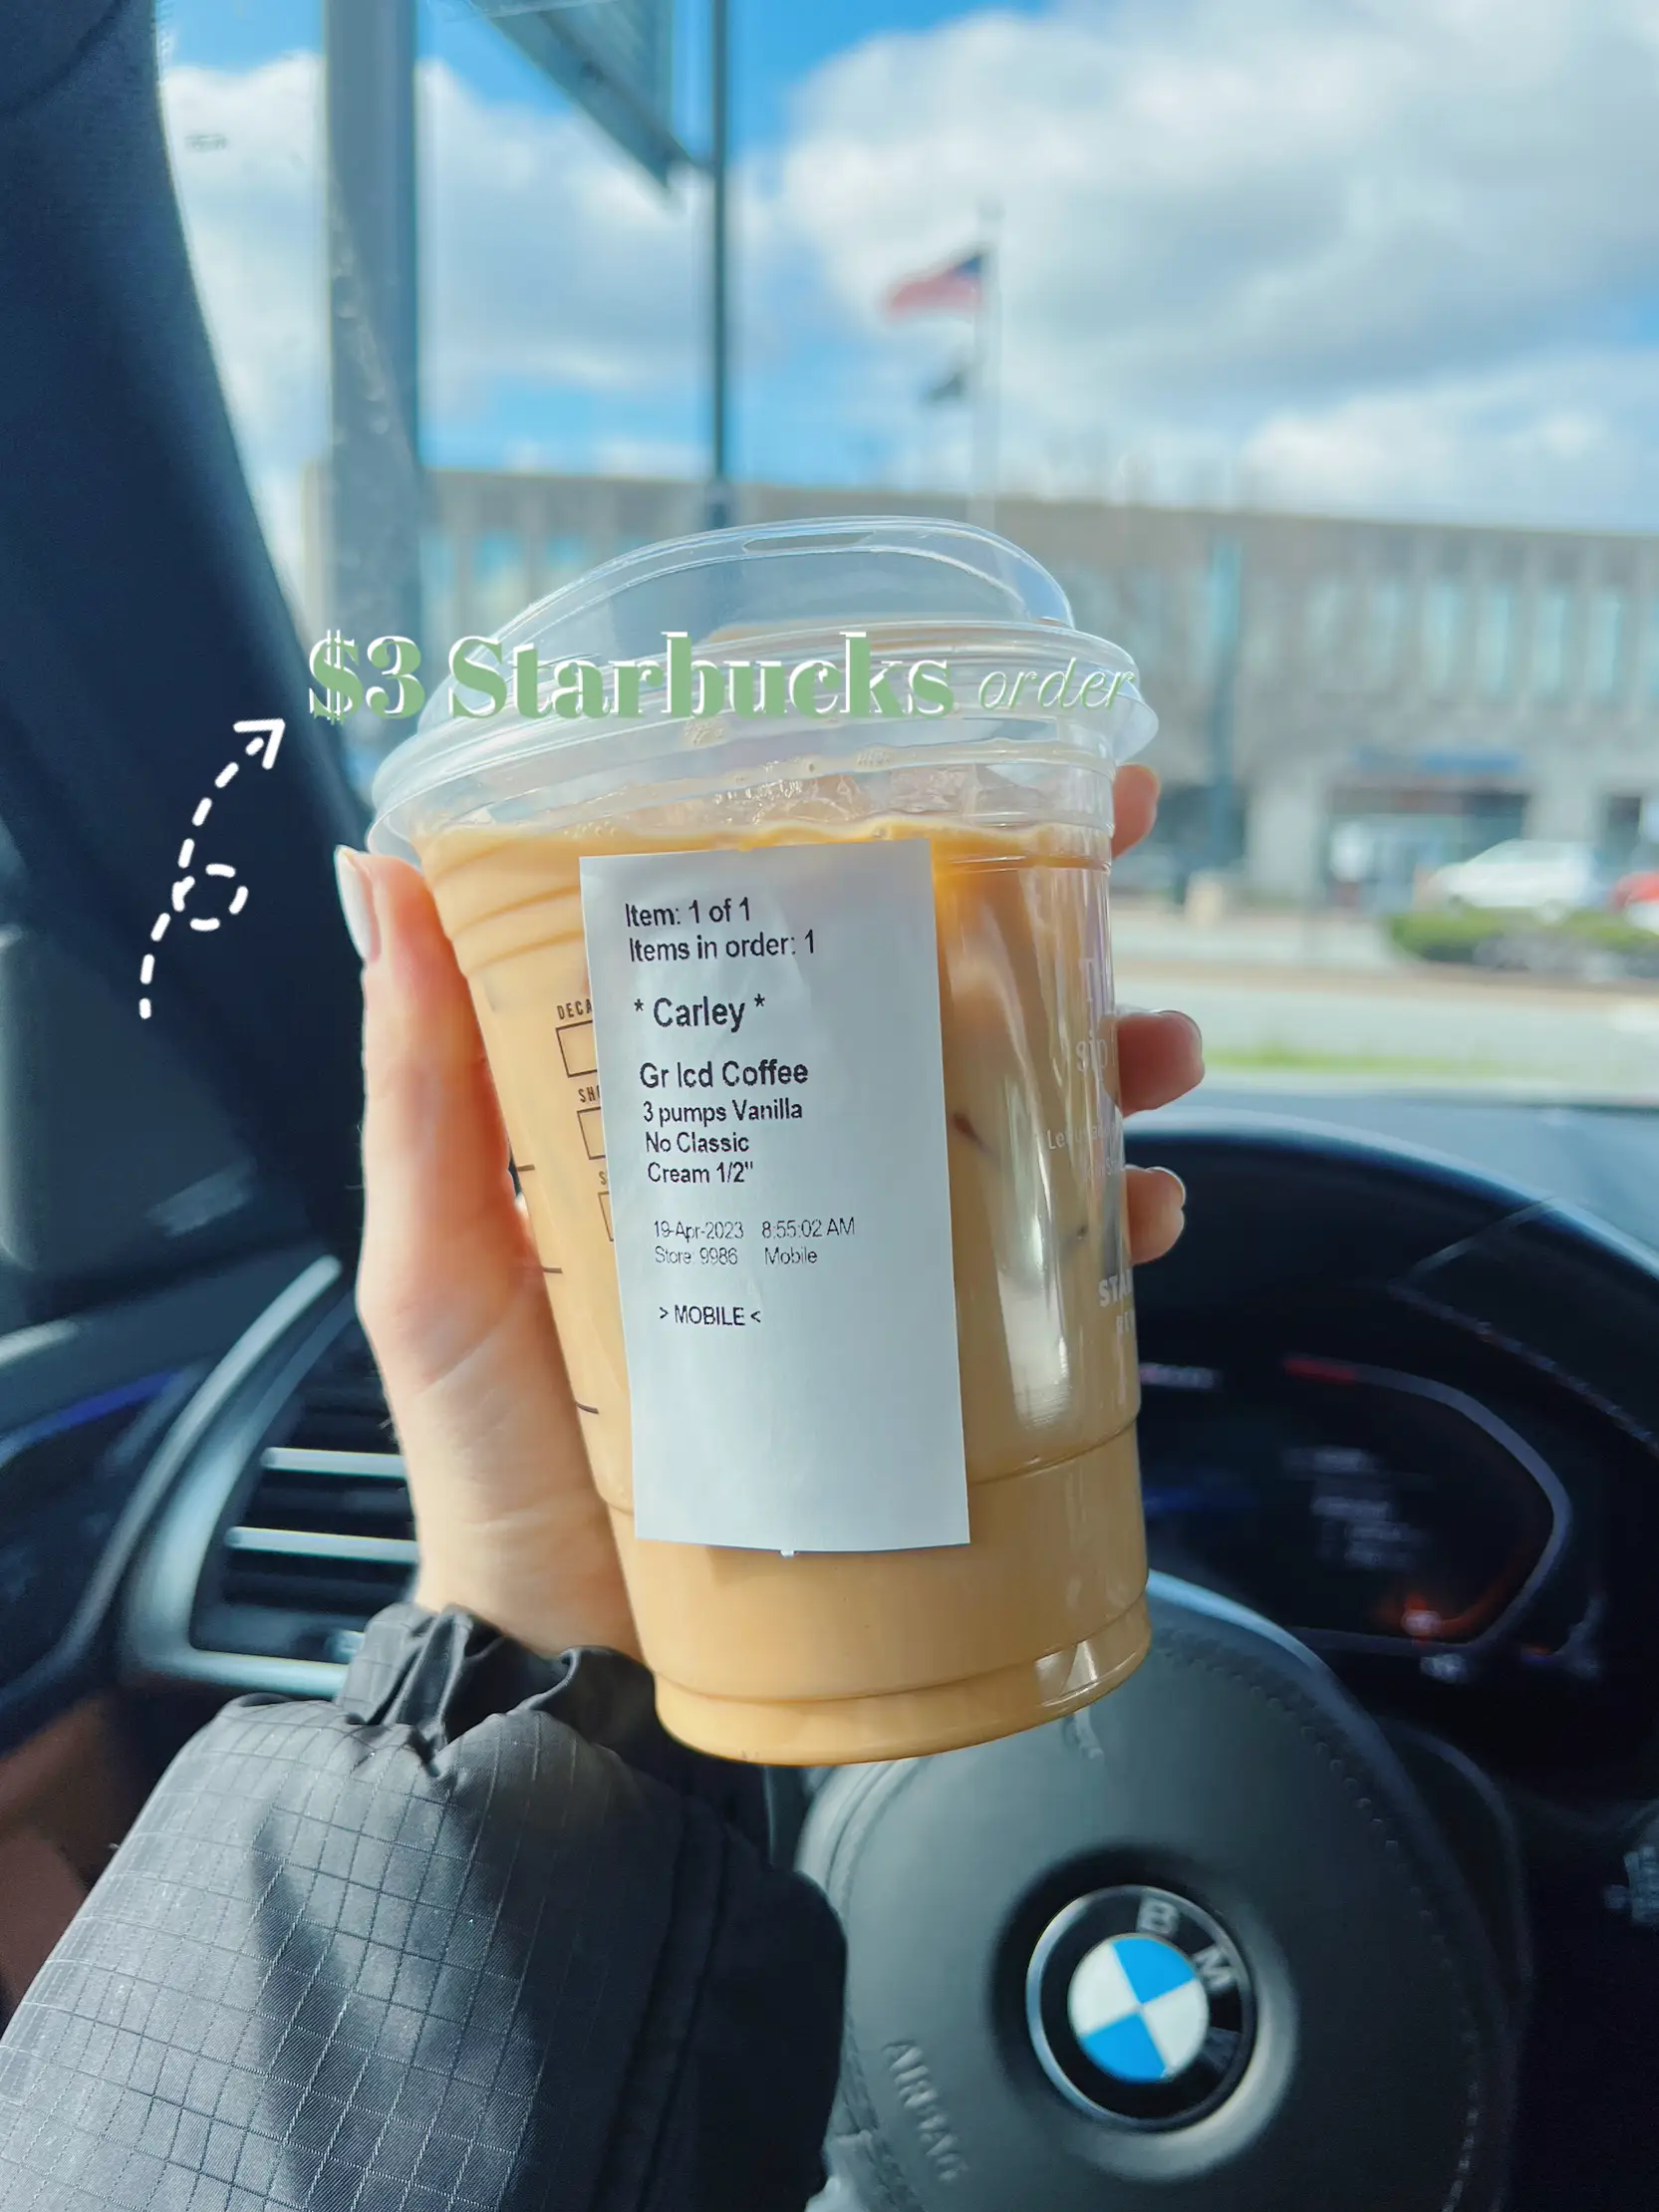 Today is $3 Coffee Day at Starbucks